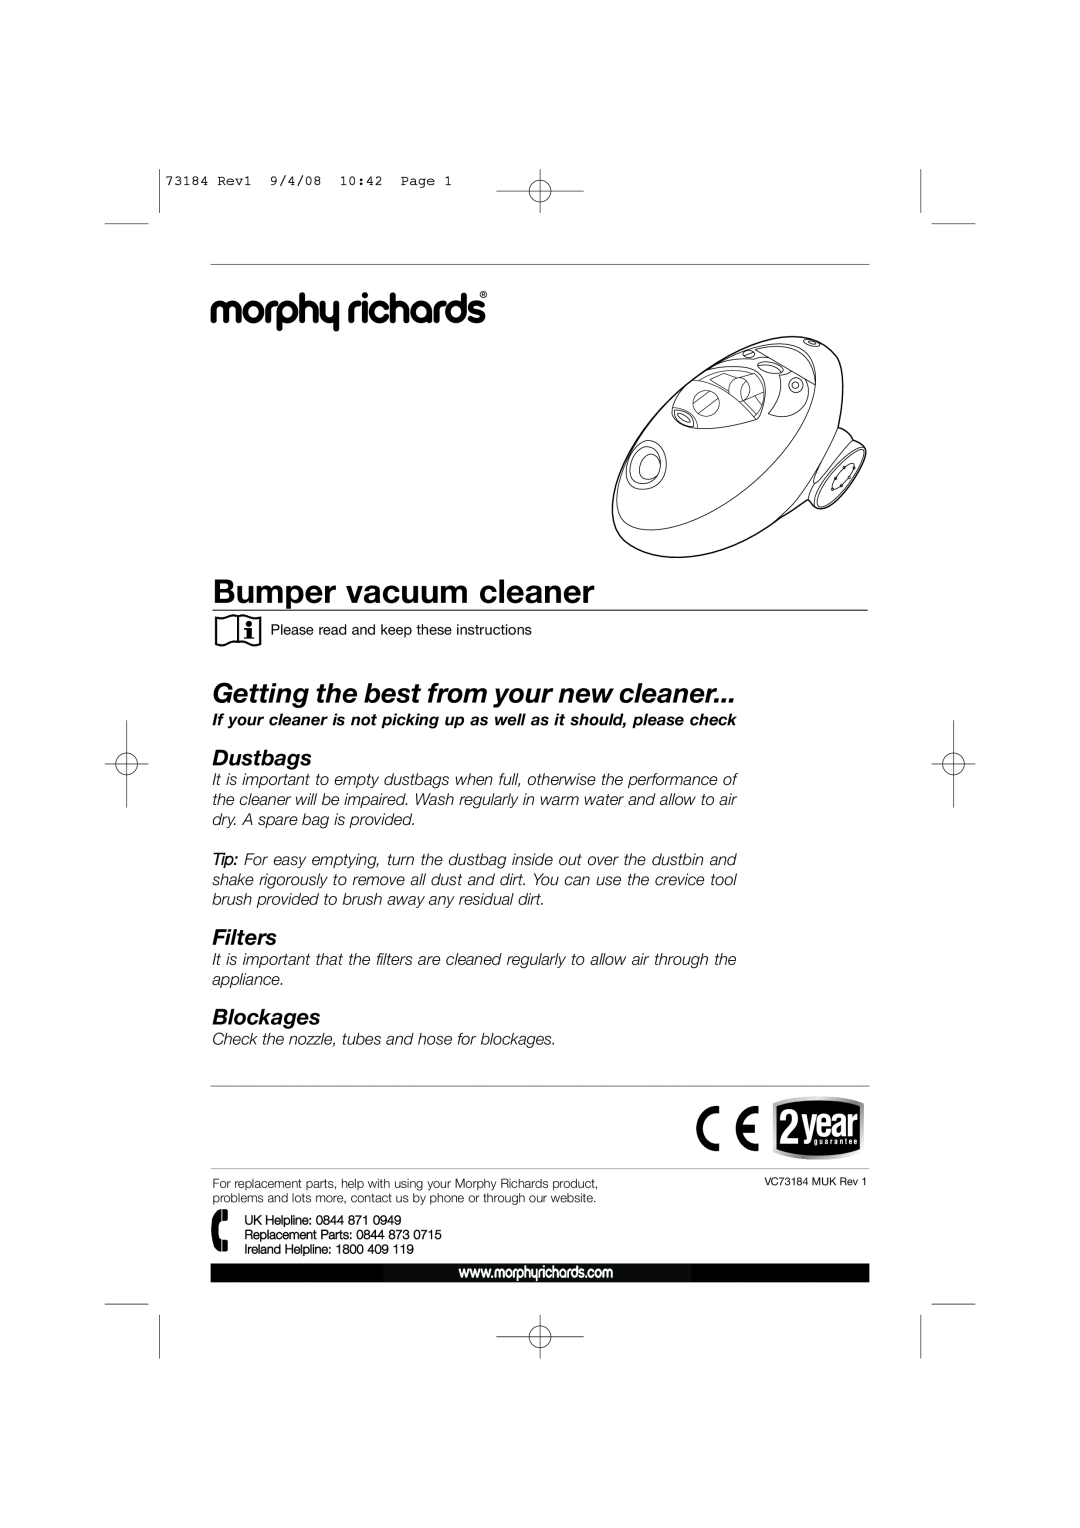 Morphy Richards VC73184 manual Bumper vacuum cleaner, Getting the best from your new cleaner, Dustbags, Filters, Blockages 